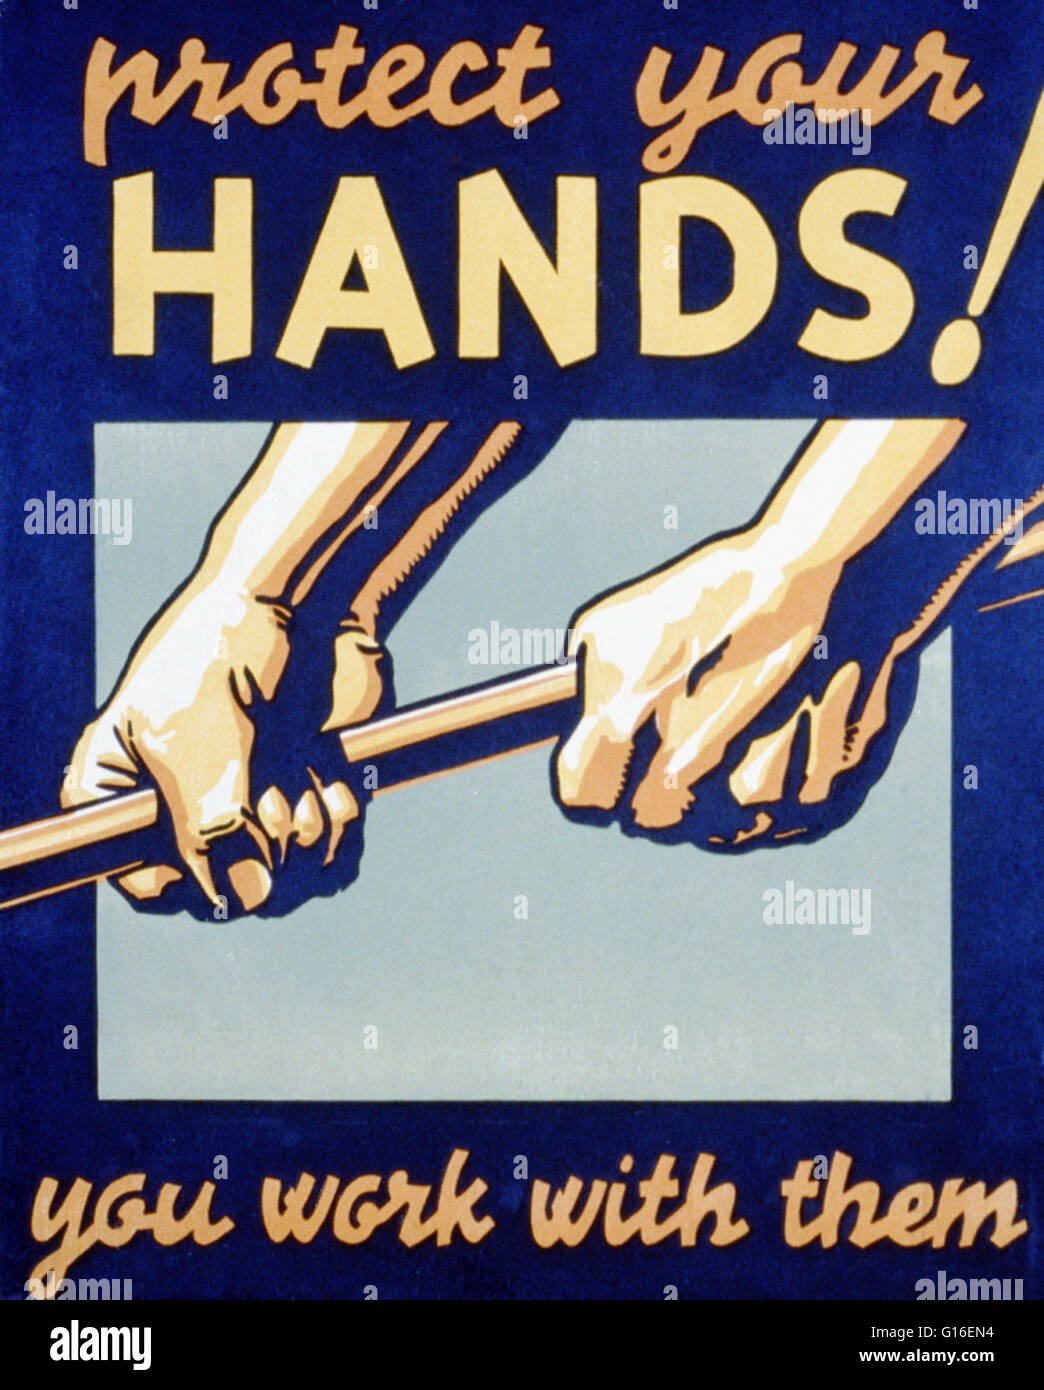 Entitled: 'Protect your hands! You work with them'. Poster promoting safety in the workplace, showing hands grasping a rod. The Federal Art Project (FAP) was the visual arts arm of the Great Depression era New Deal Works Progress Administration Federal Pr Stock Photo